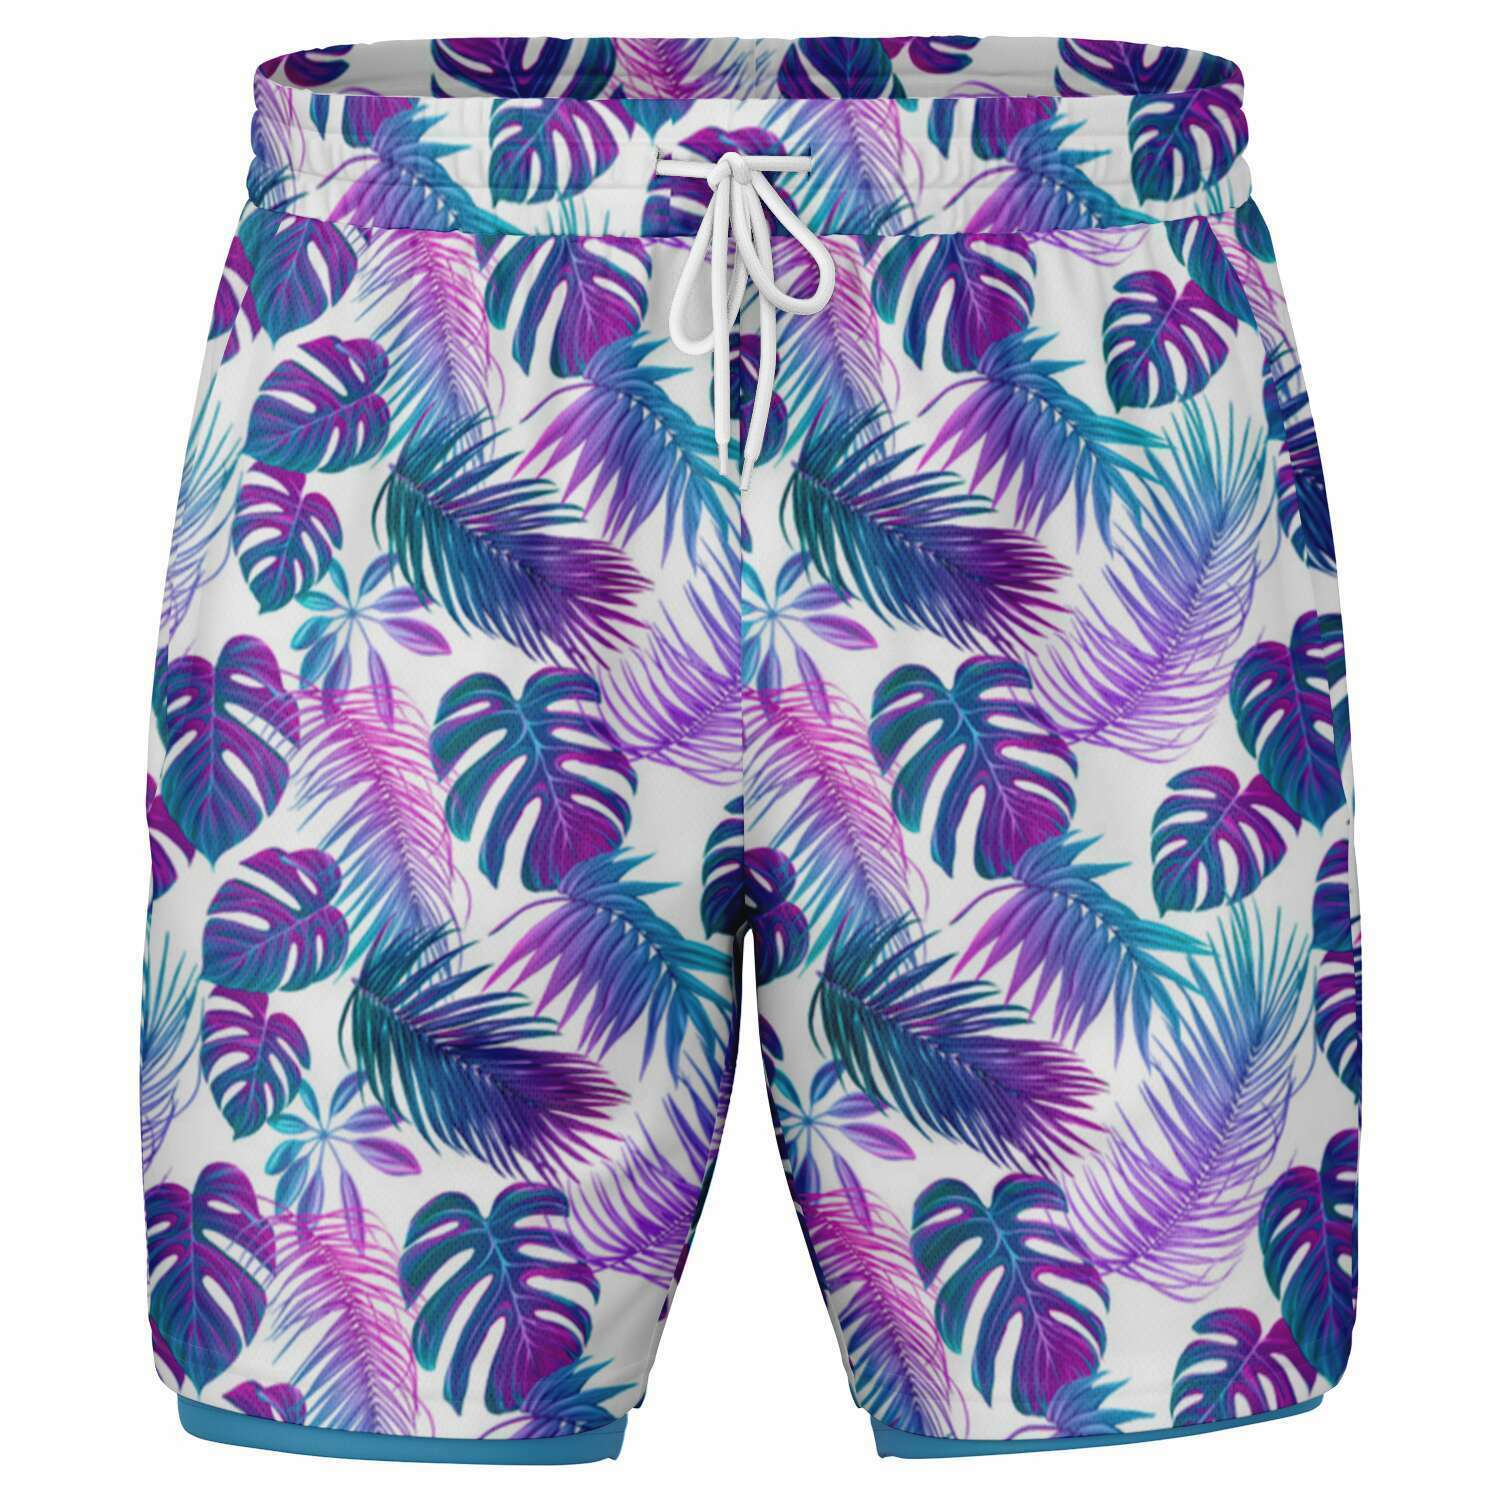 Rad Palm The Kahuna Men's 2-in-1 Shorts